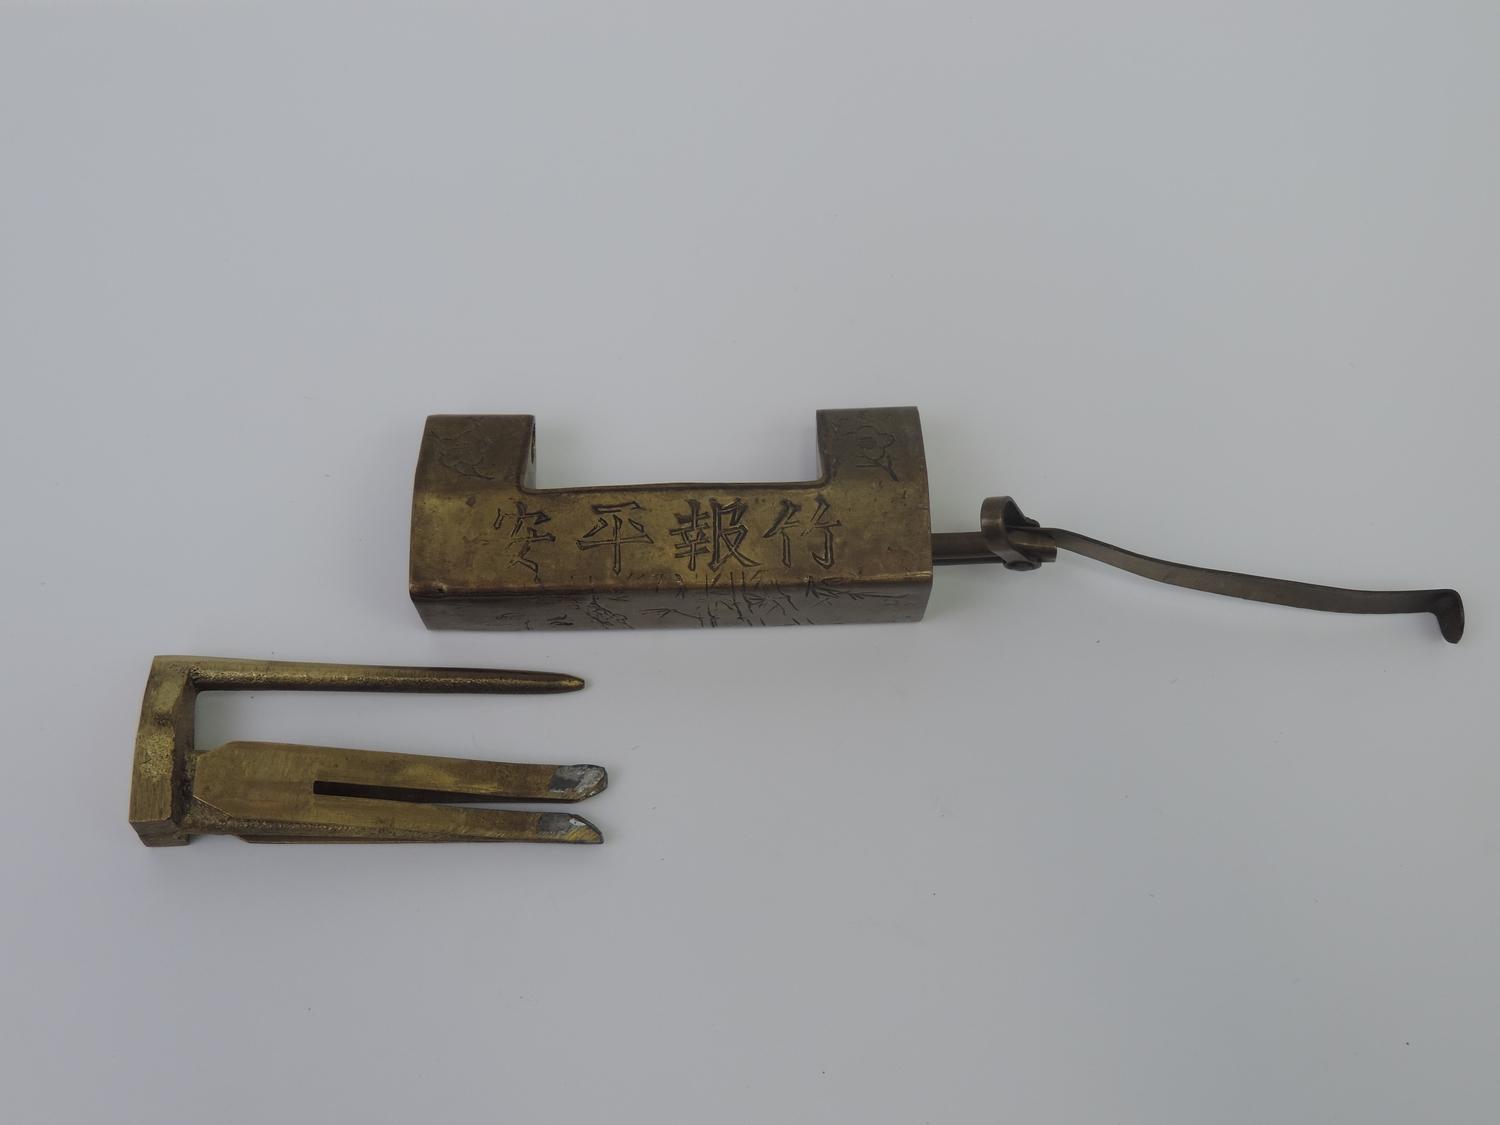 Chinese Brass Padlock with Key - Image 3 of 4